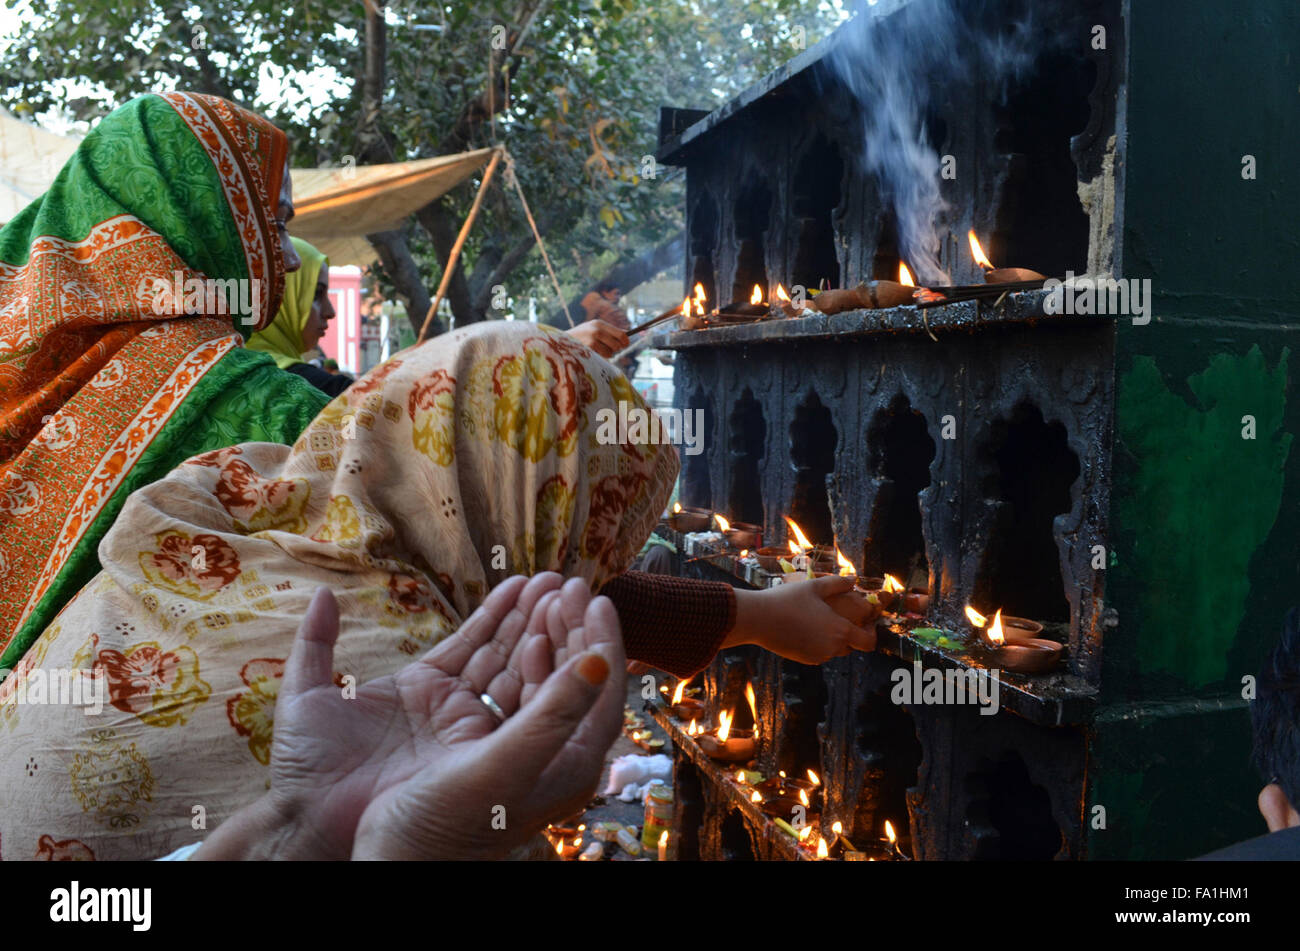 Lahore. 19th Dec, 2015. Pakistani Muslim devotees light candles and oil lamps at the shrine of the Sufi saint Mian Mir Sahib during a festival to mark the saint's death anniversary in eastern Pakistan's Lahore, Dec. 19, 2015. Hundreds of devotees are attending the two-day festival. © Jamil Ahmed/Xinhua/Alamy Live News Stock Photo